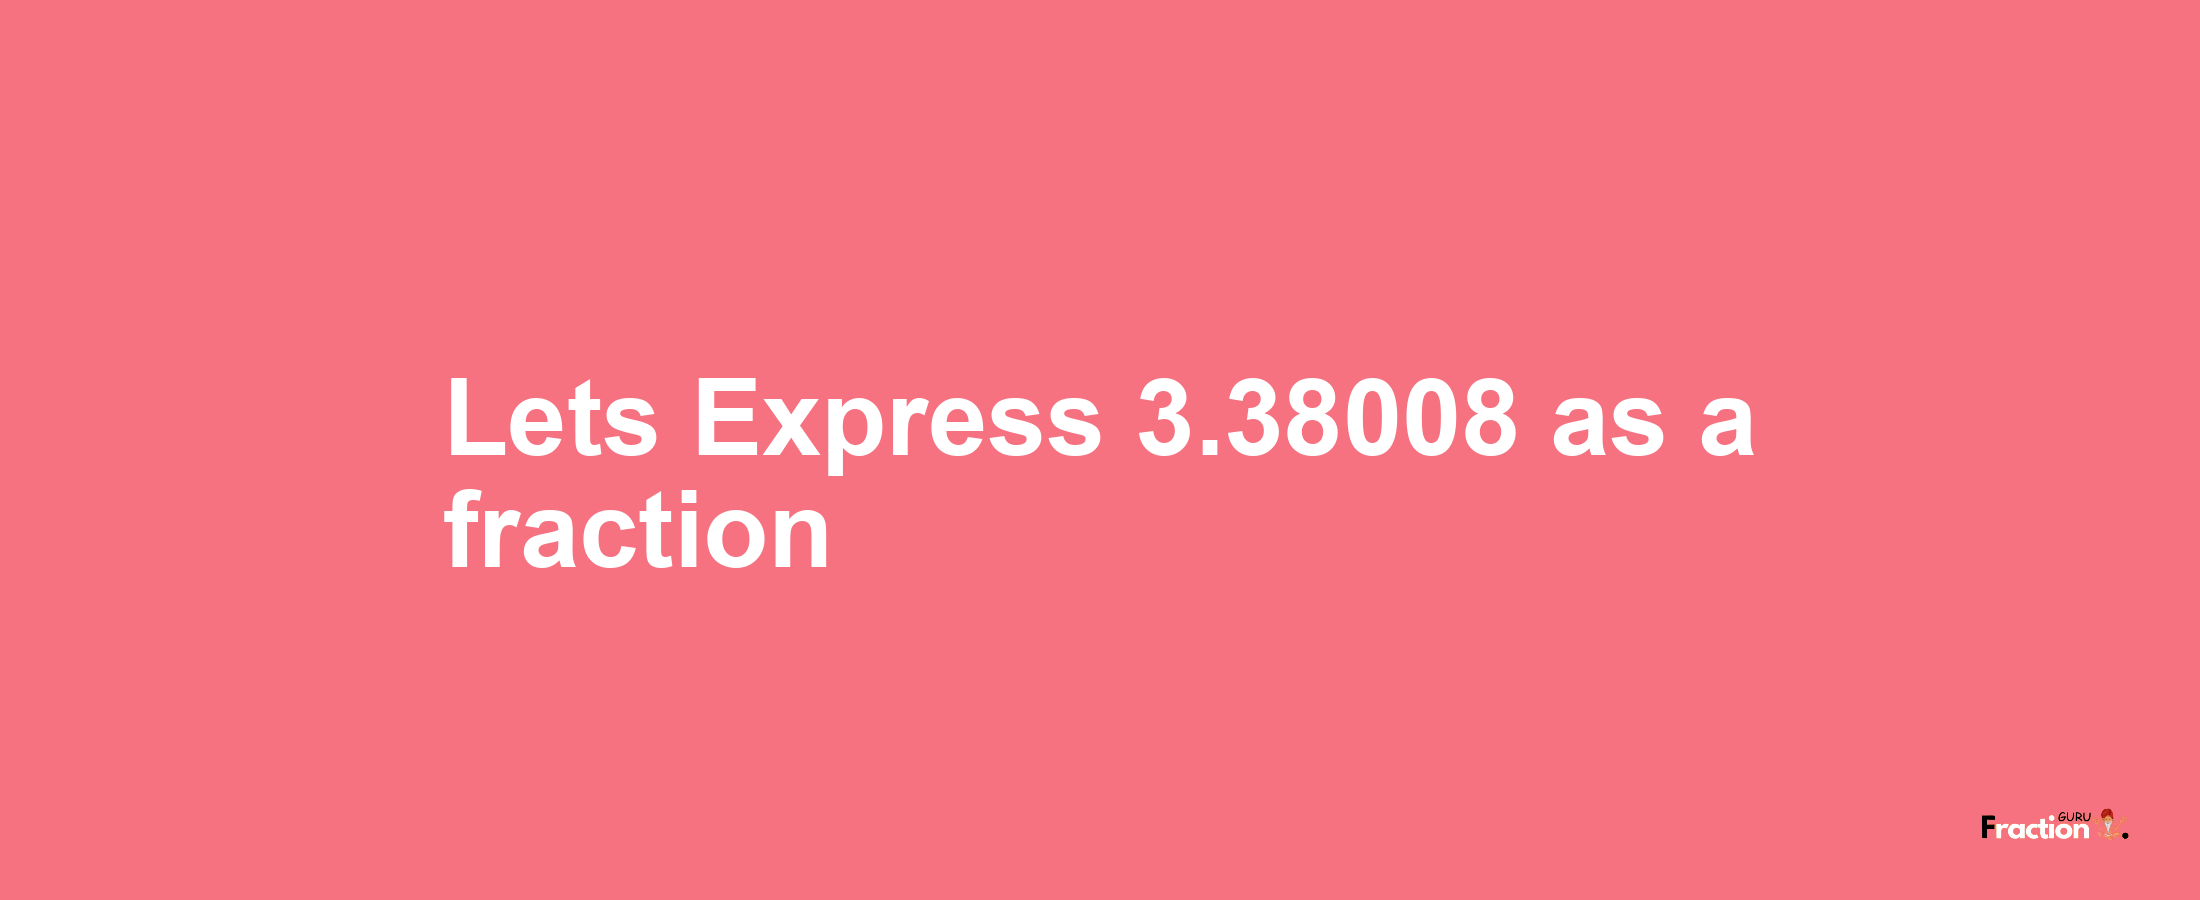 Lets Express 3.38008 as afraction